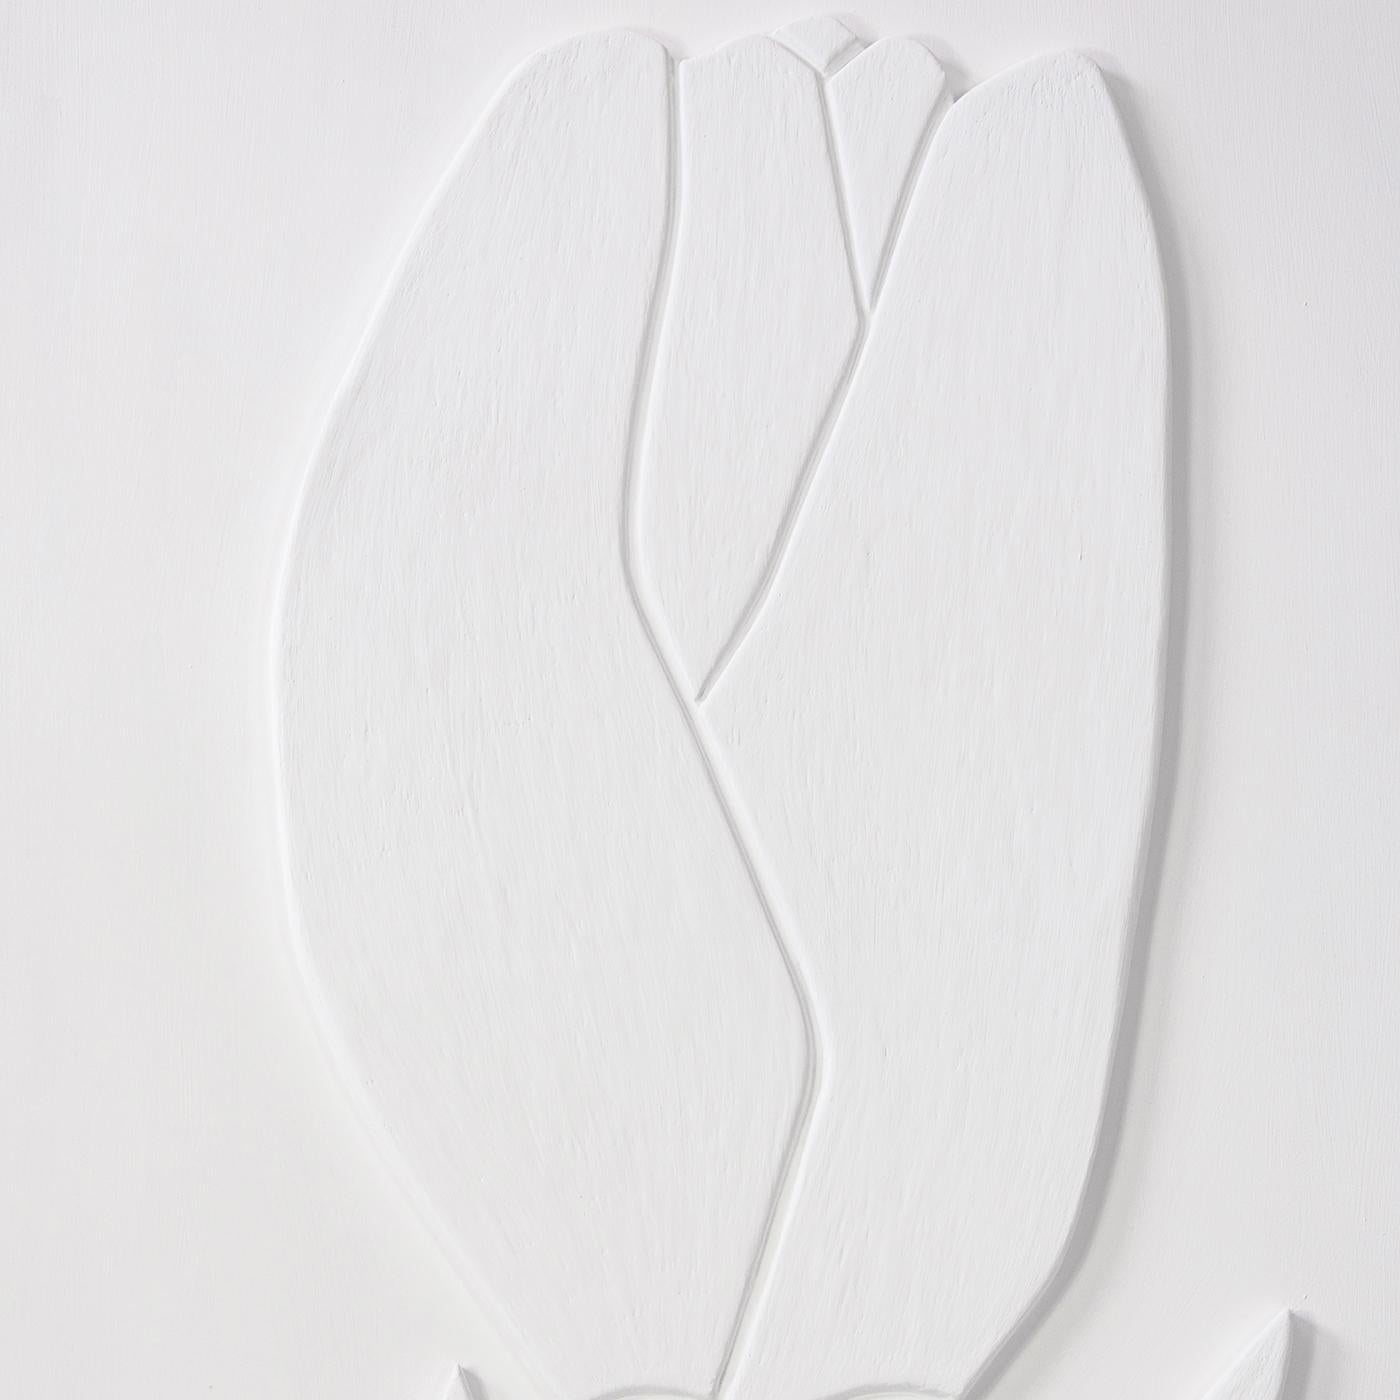 A splendid artwork of incomparable elegance and masterful craftsmanship, this exquisite wall panel is entirely handcrafted and painted by artist Giannella Ventura. Painted on wood, it features a three-dimensional white tulip set against a two-tone,